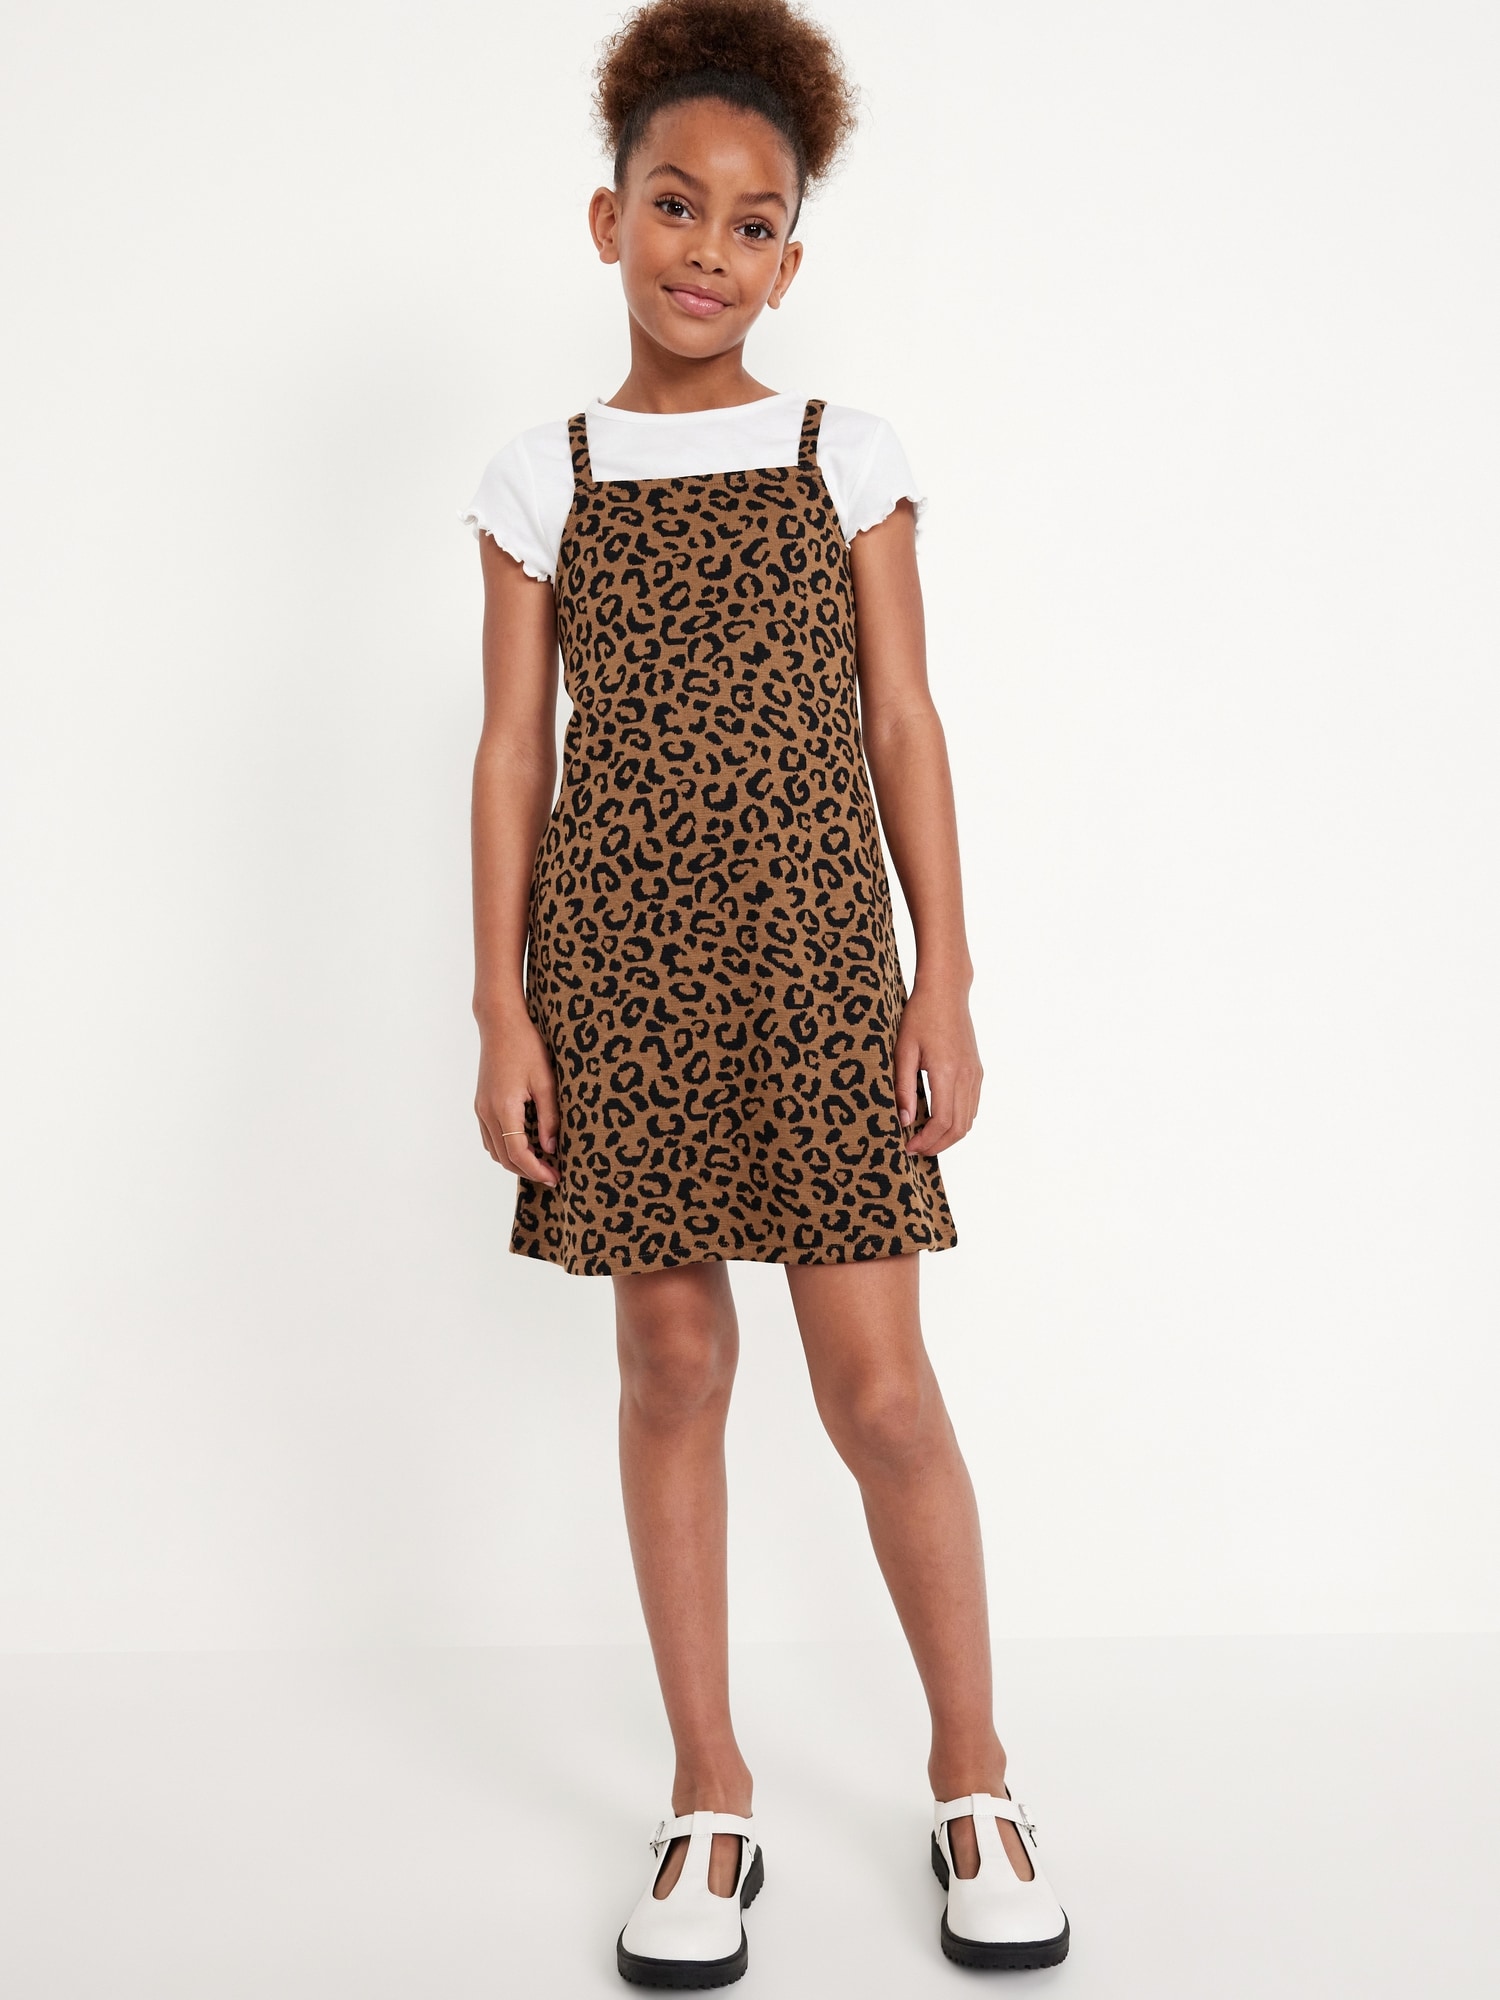 Sleeveless Fit and Flare Dress and T-Shirt Set for Girls